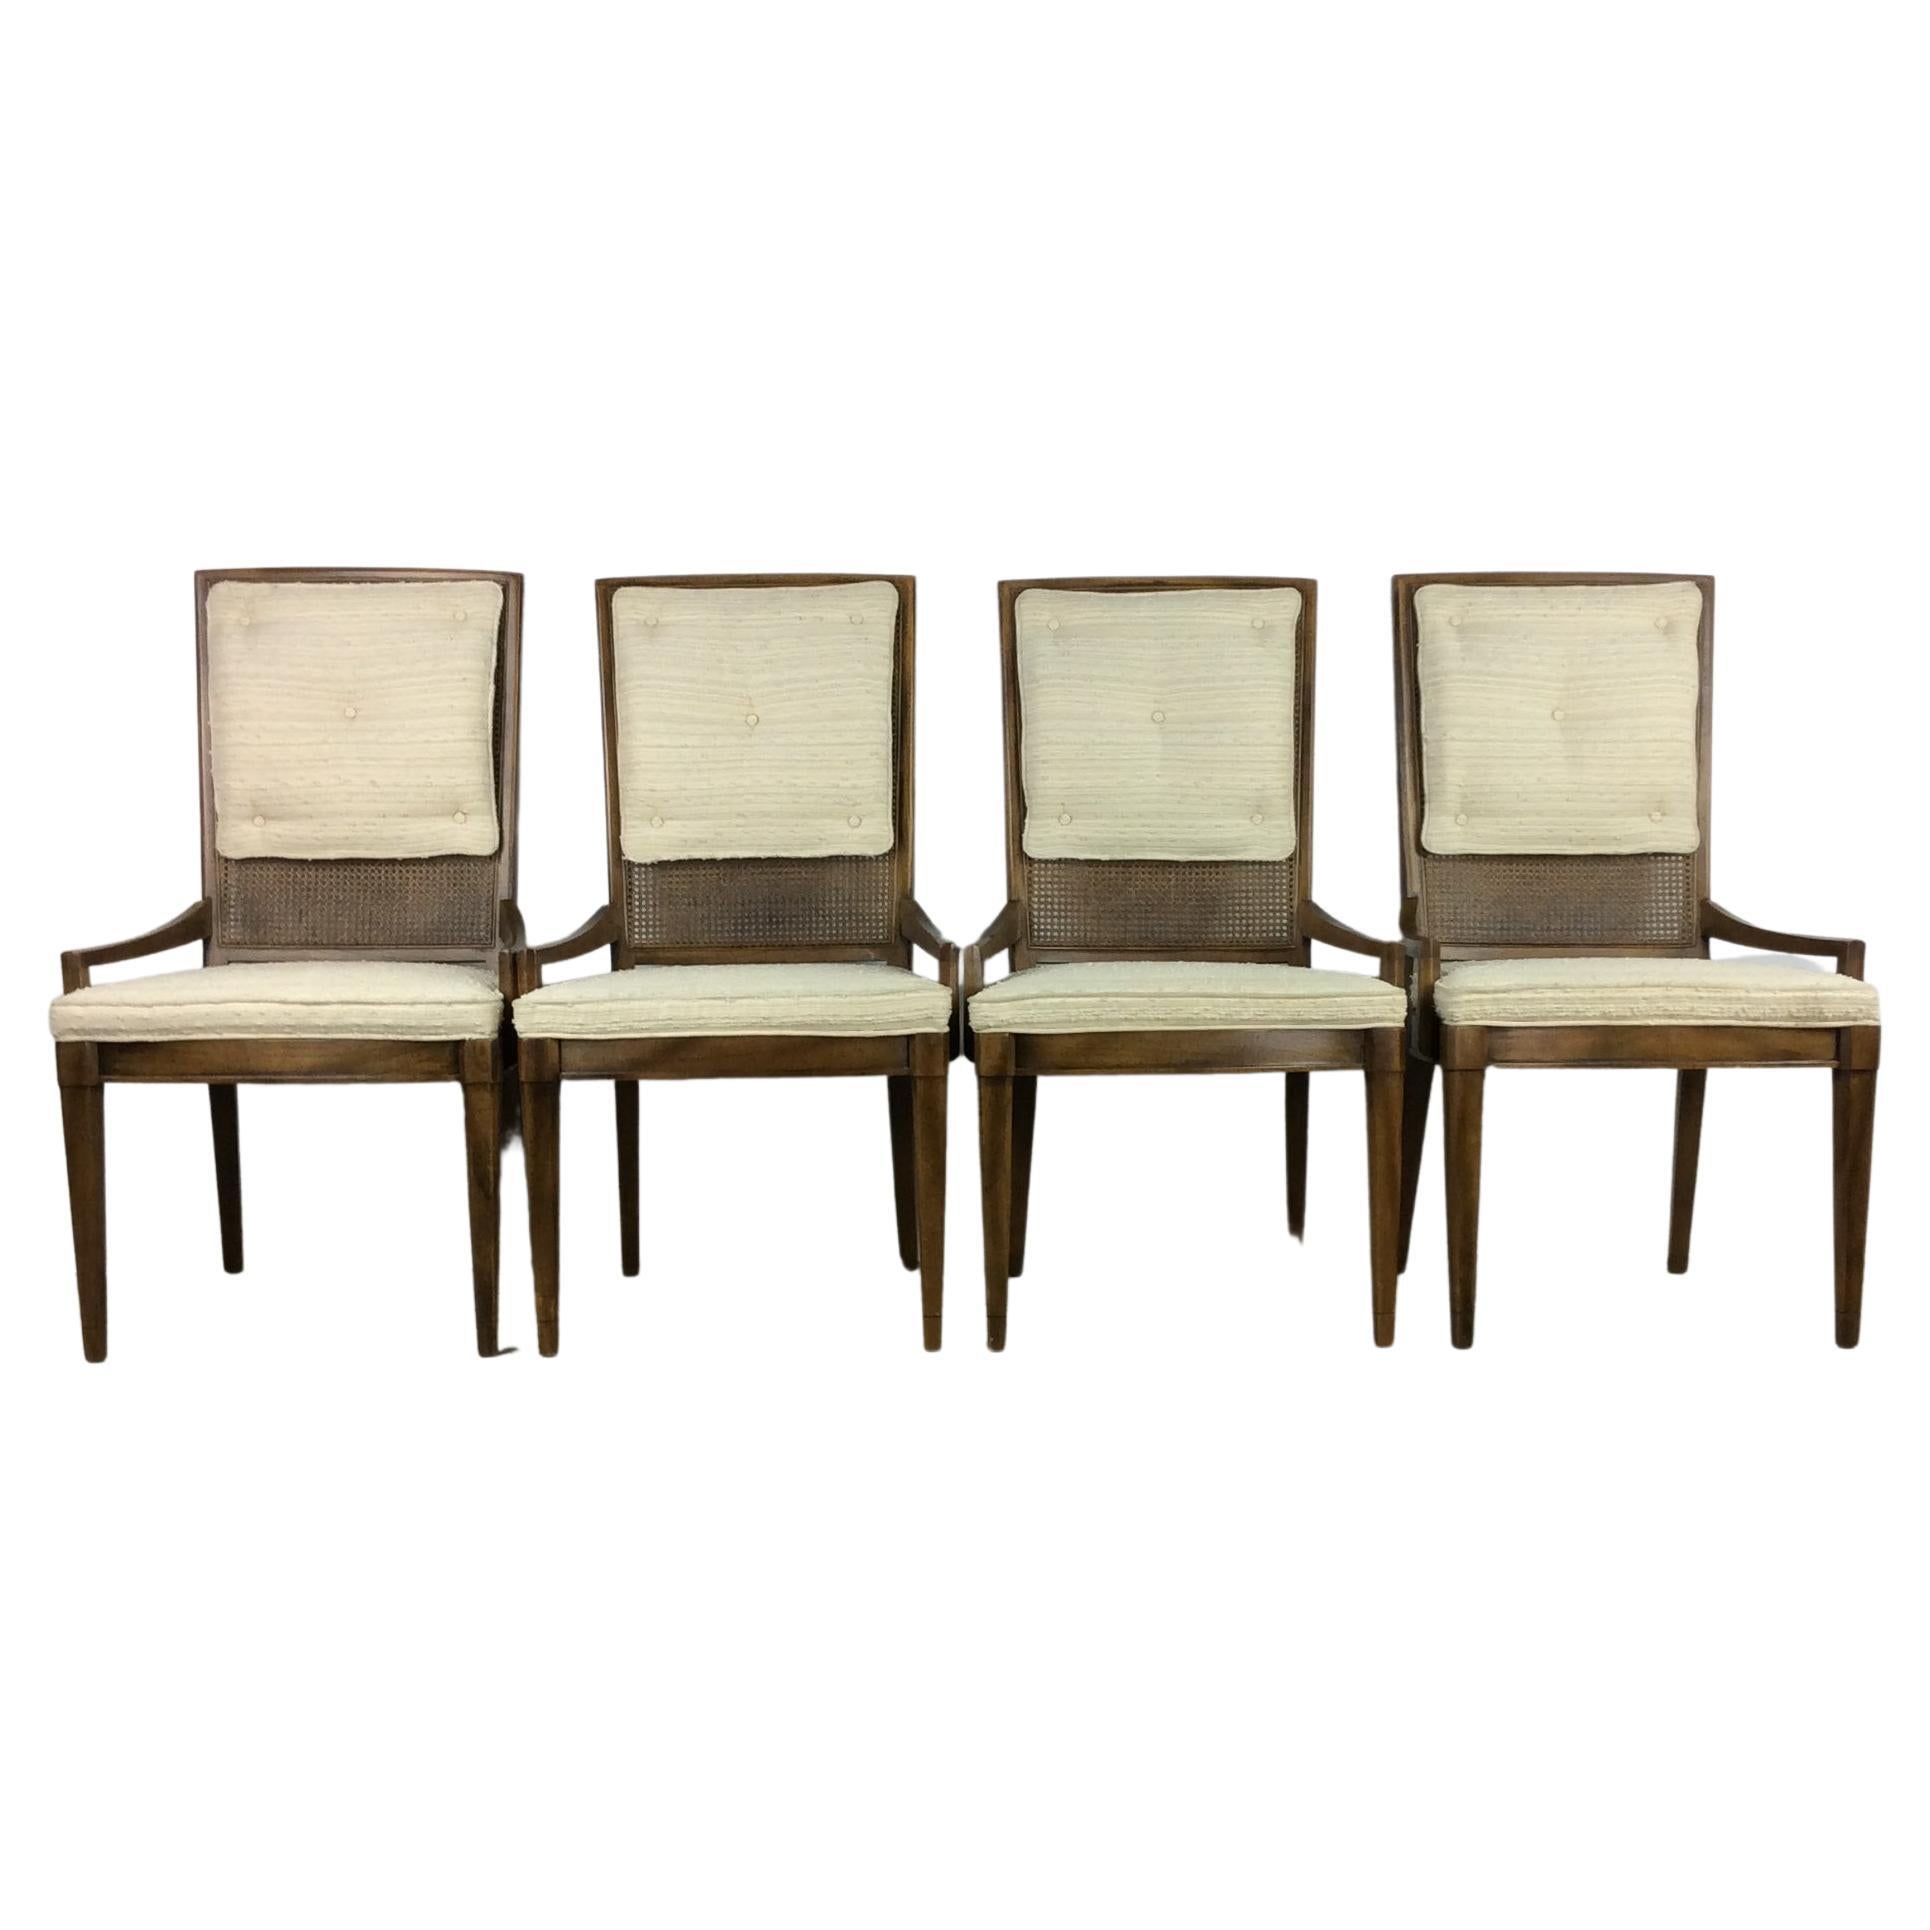 Set of 4 Mid-Century Modern Caned Back Dining Chairs with Tufted Cushions